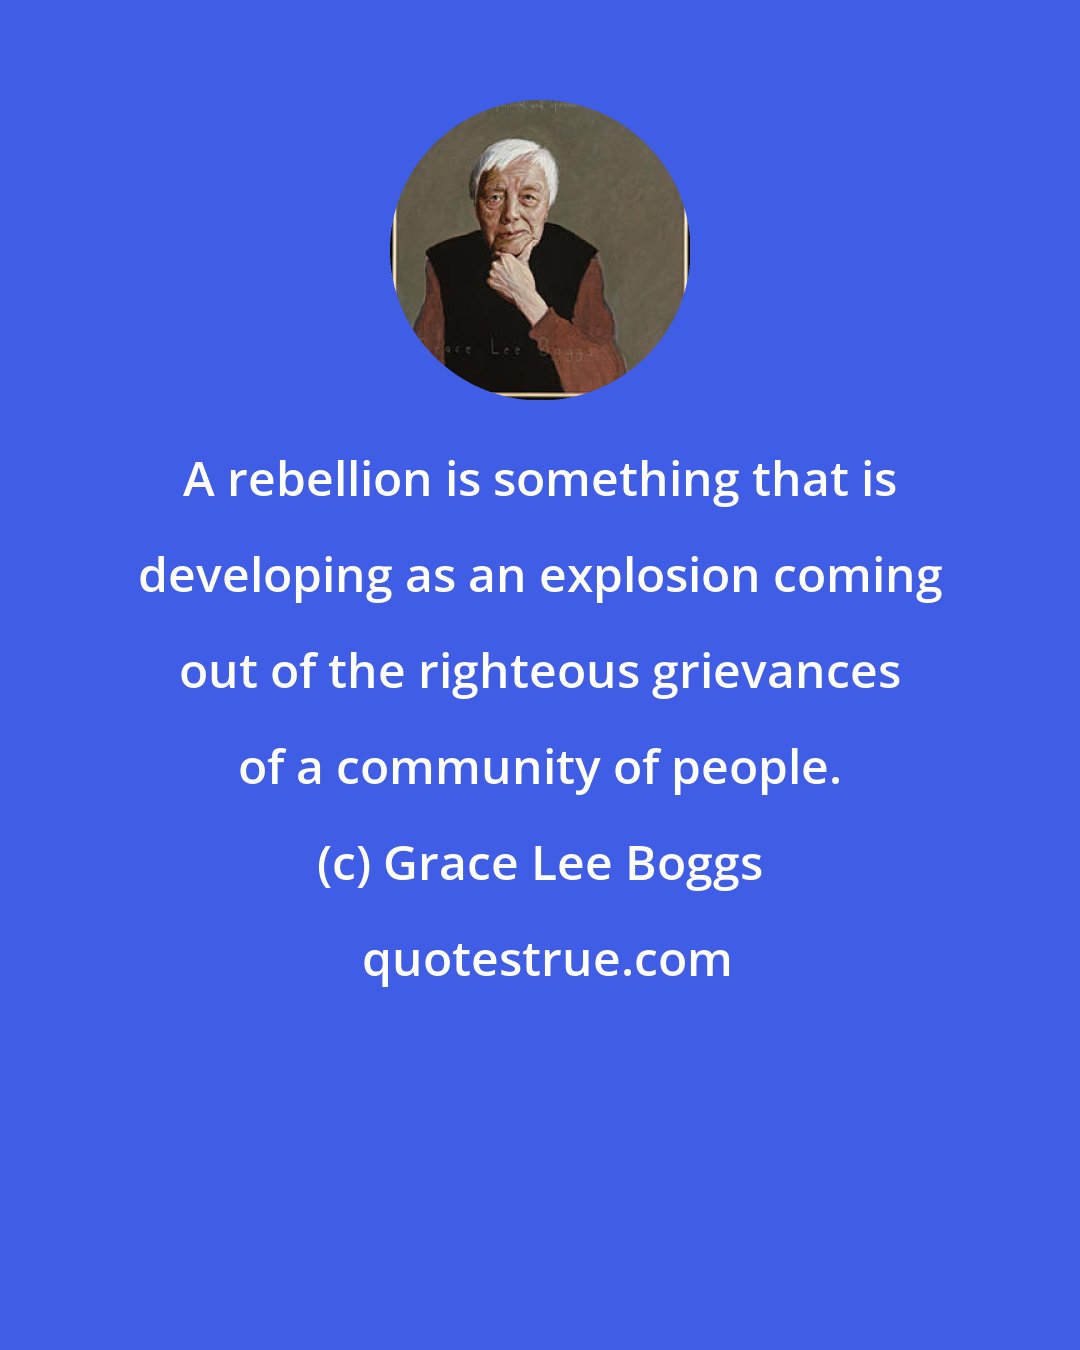 Grace Lee Boggs: A rebellion is something that is developing as an explosion coming out of the righteous grievances of a community of people.